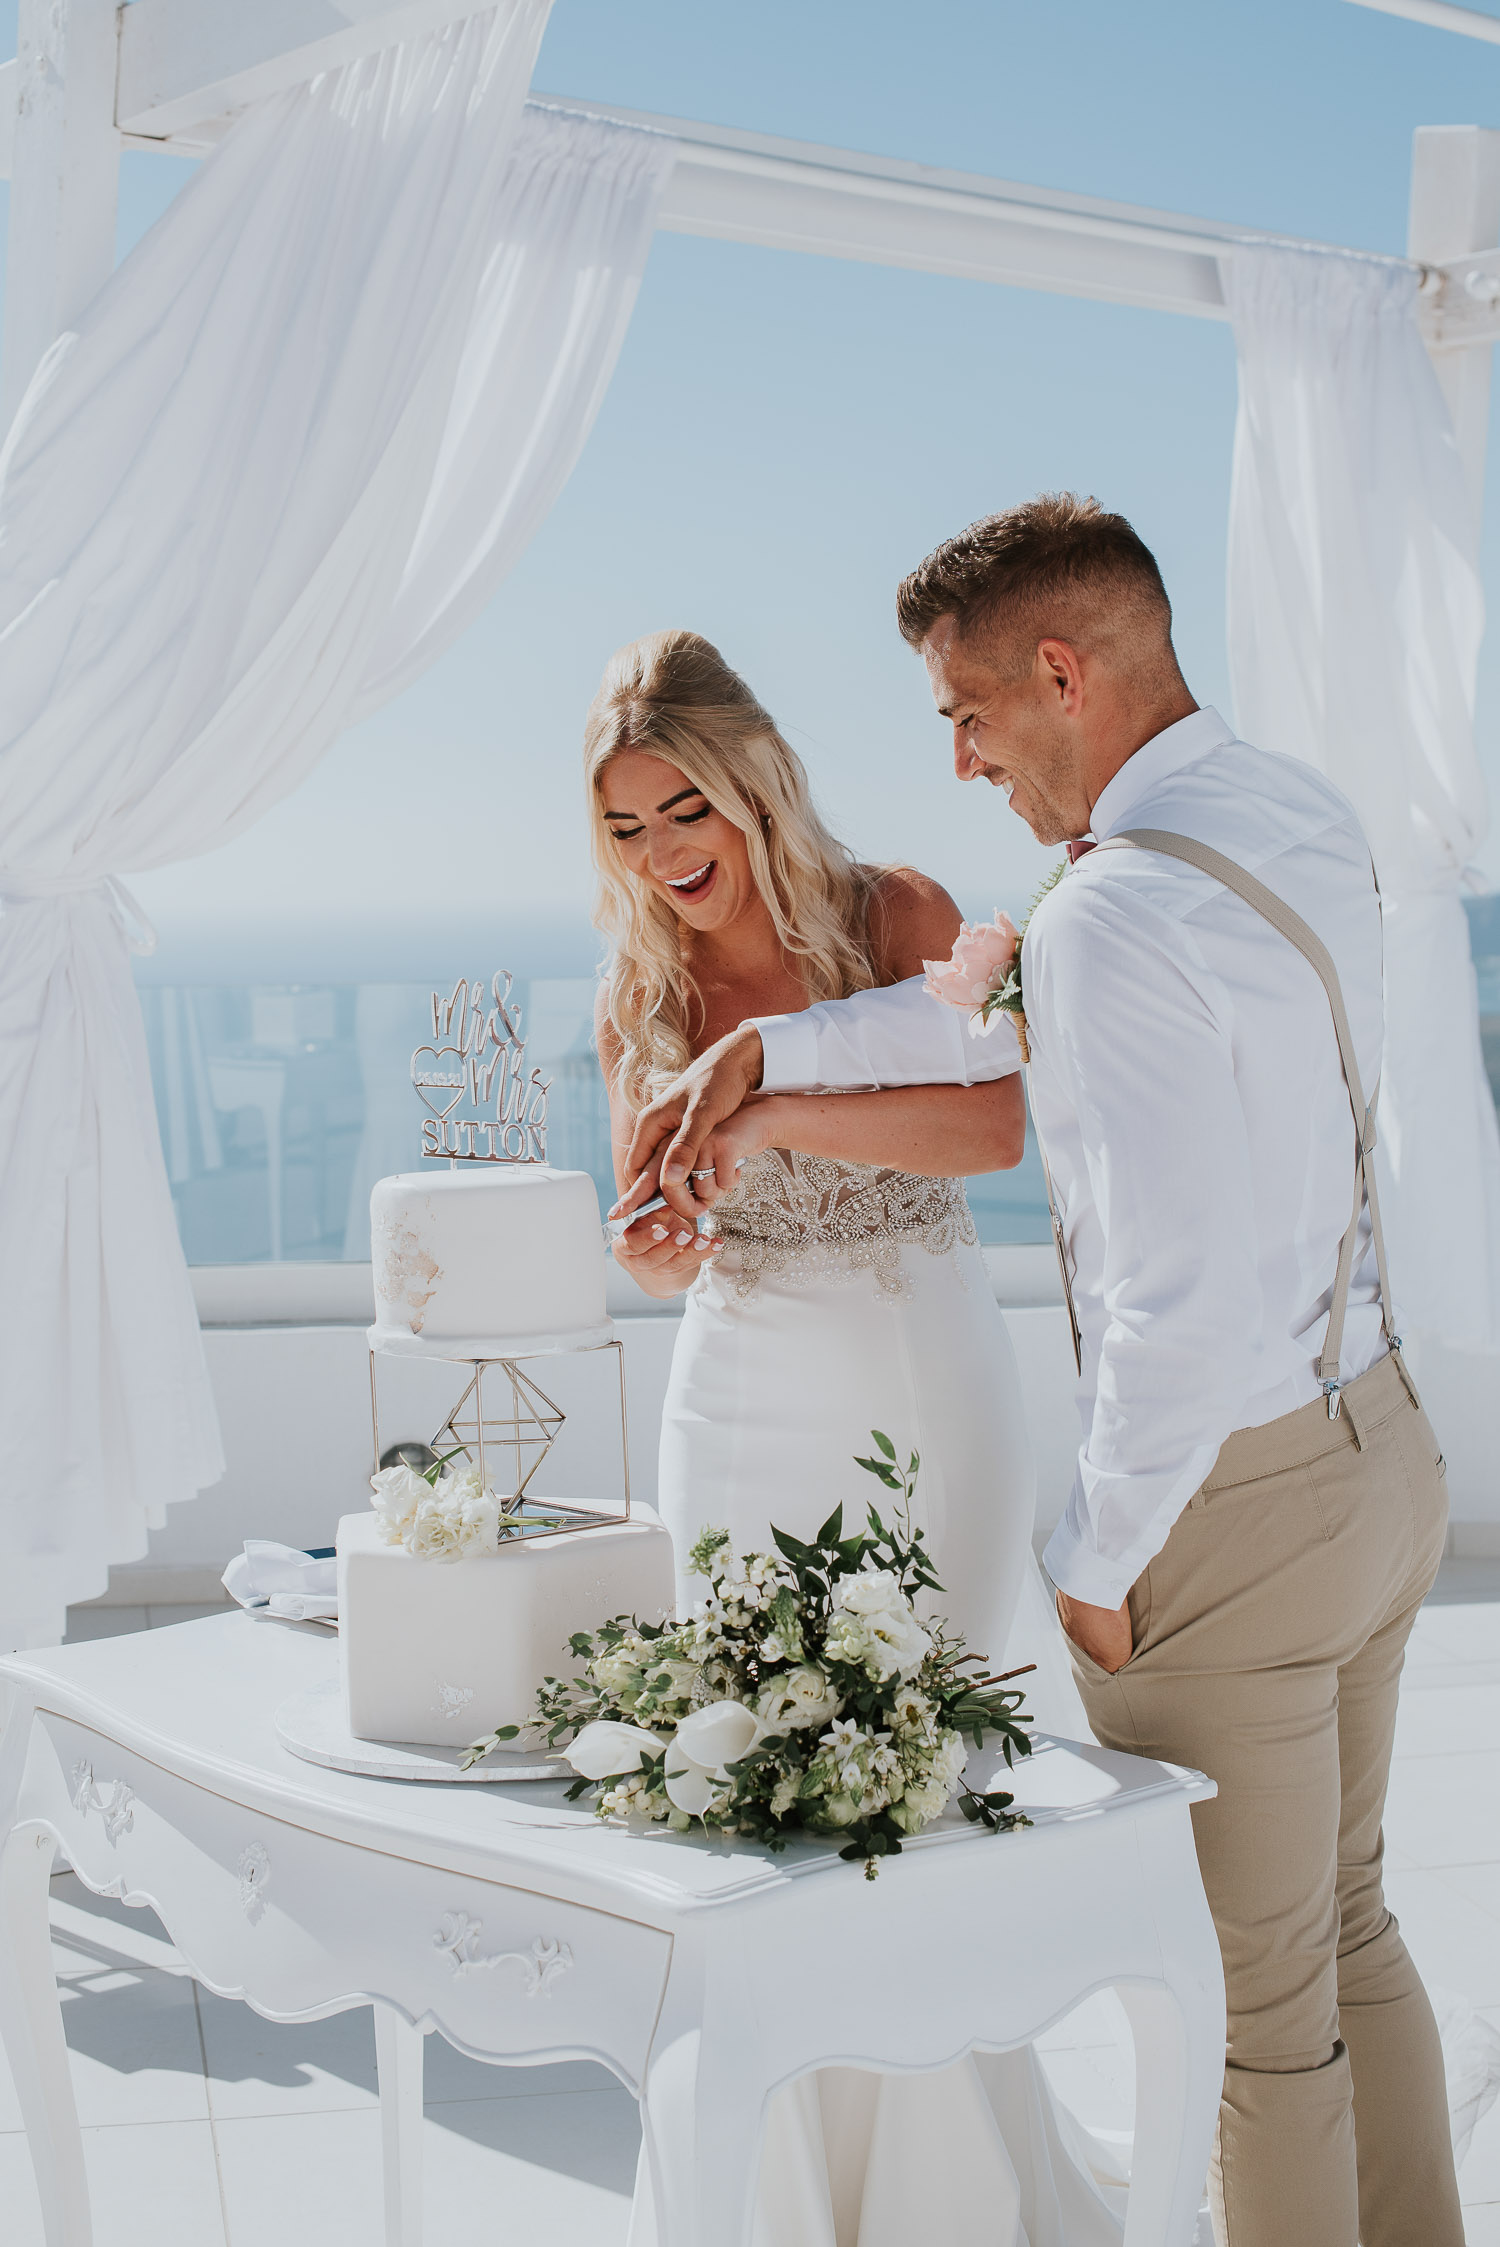 Wedding photographer Santorini: close up of bride and groom laughing as they cut their beautiful cake under gazebo by Ben and Vesna.